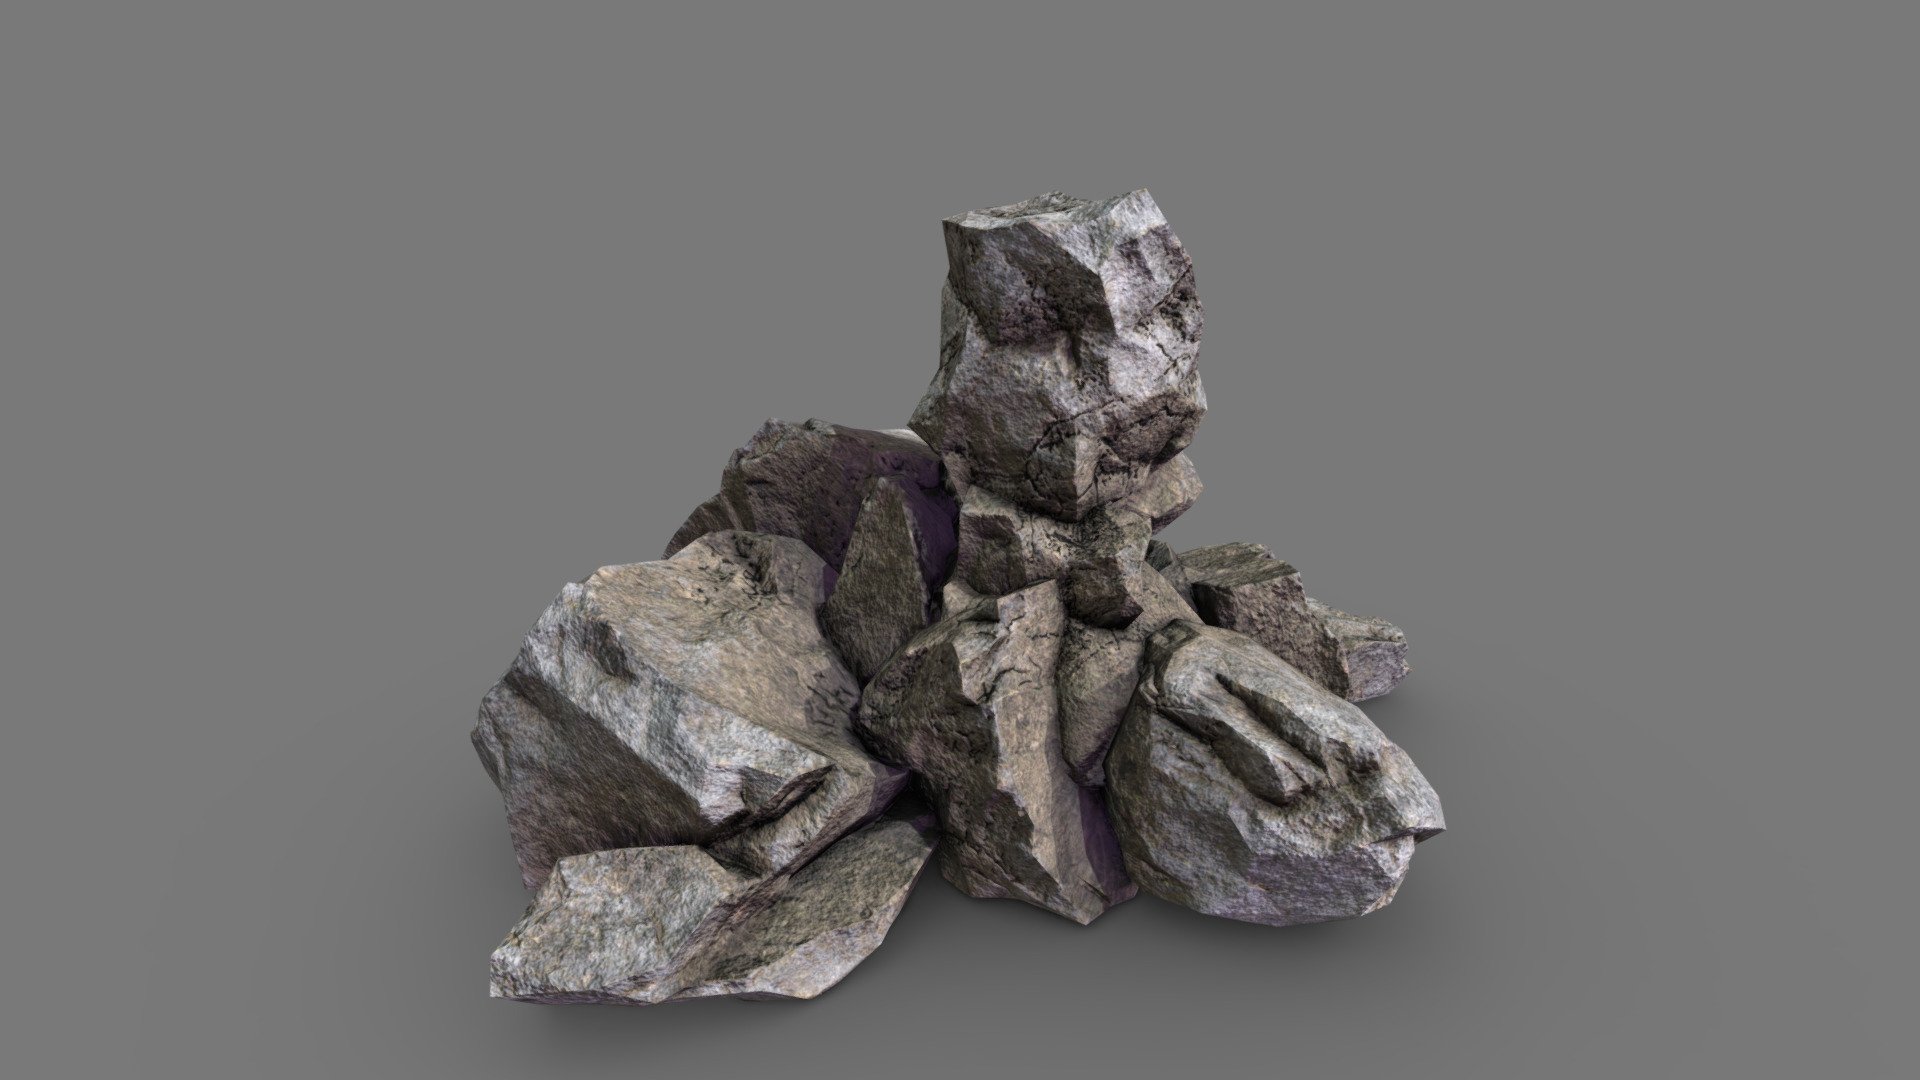 Rock low poly

Topology: Tris

Polygon count: 2732

Vertices count: 1366

Textures: Diffuse, Normal, Specular, Glossiness, Emissive, Height, Ambient Occlusion ( all in 4k resolution)

UV mapped with non-overlapping

All files are zipped in one folder. Contains 3 file formats obj, blend &amp; fbx

Useful for games, renders, background scenes and other graphical projects 3d model